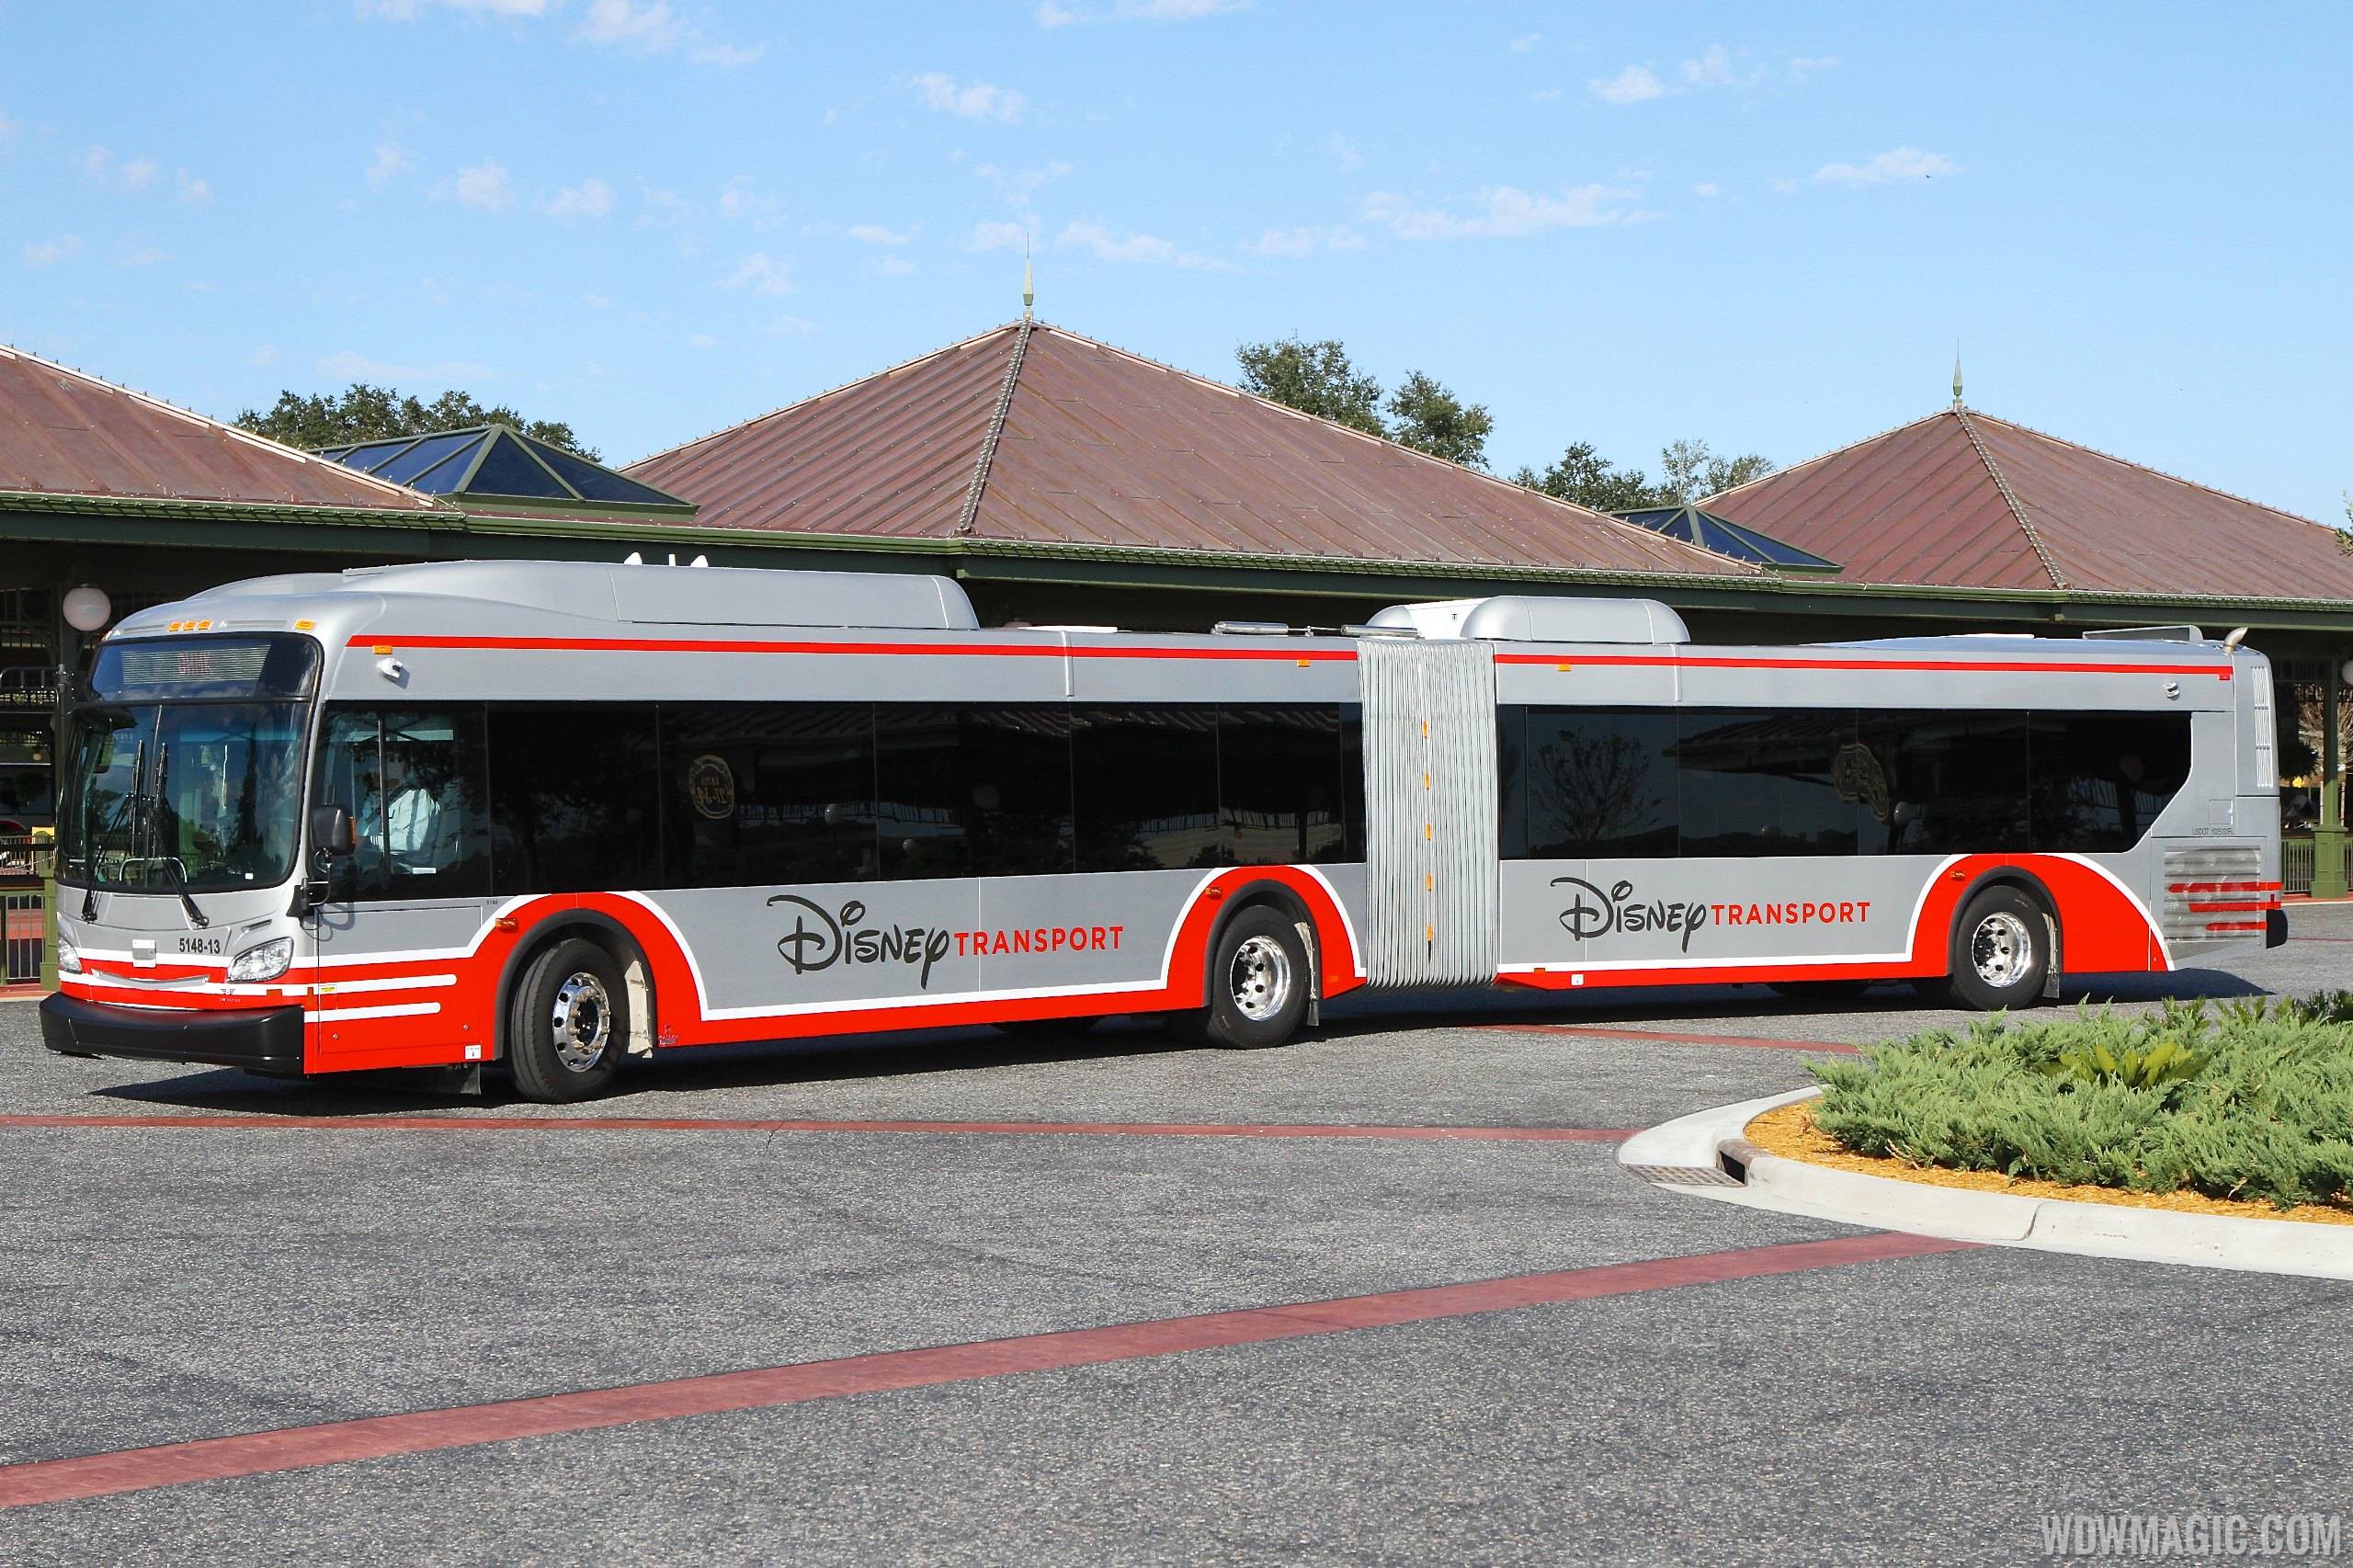 Disney does not have enough bus drivers to operate its fleet of more than 400 busses